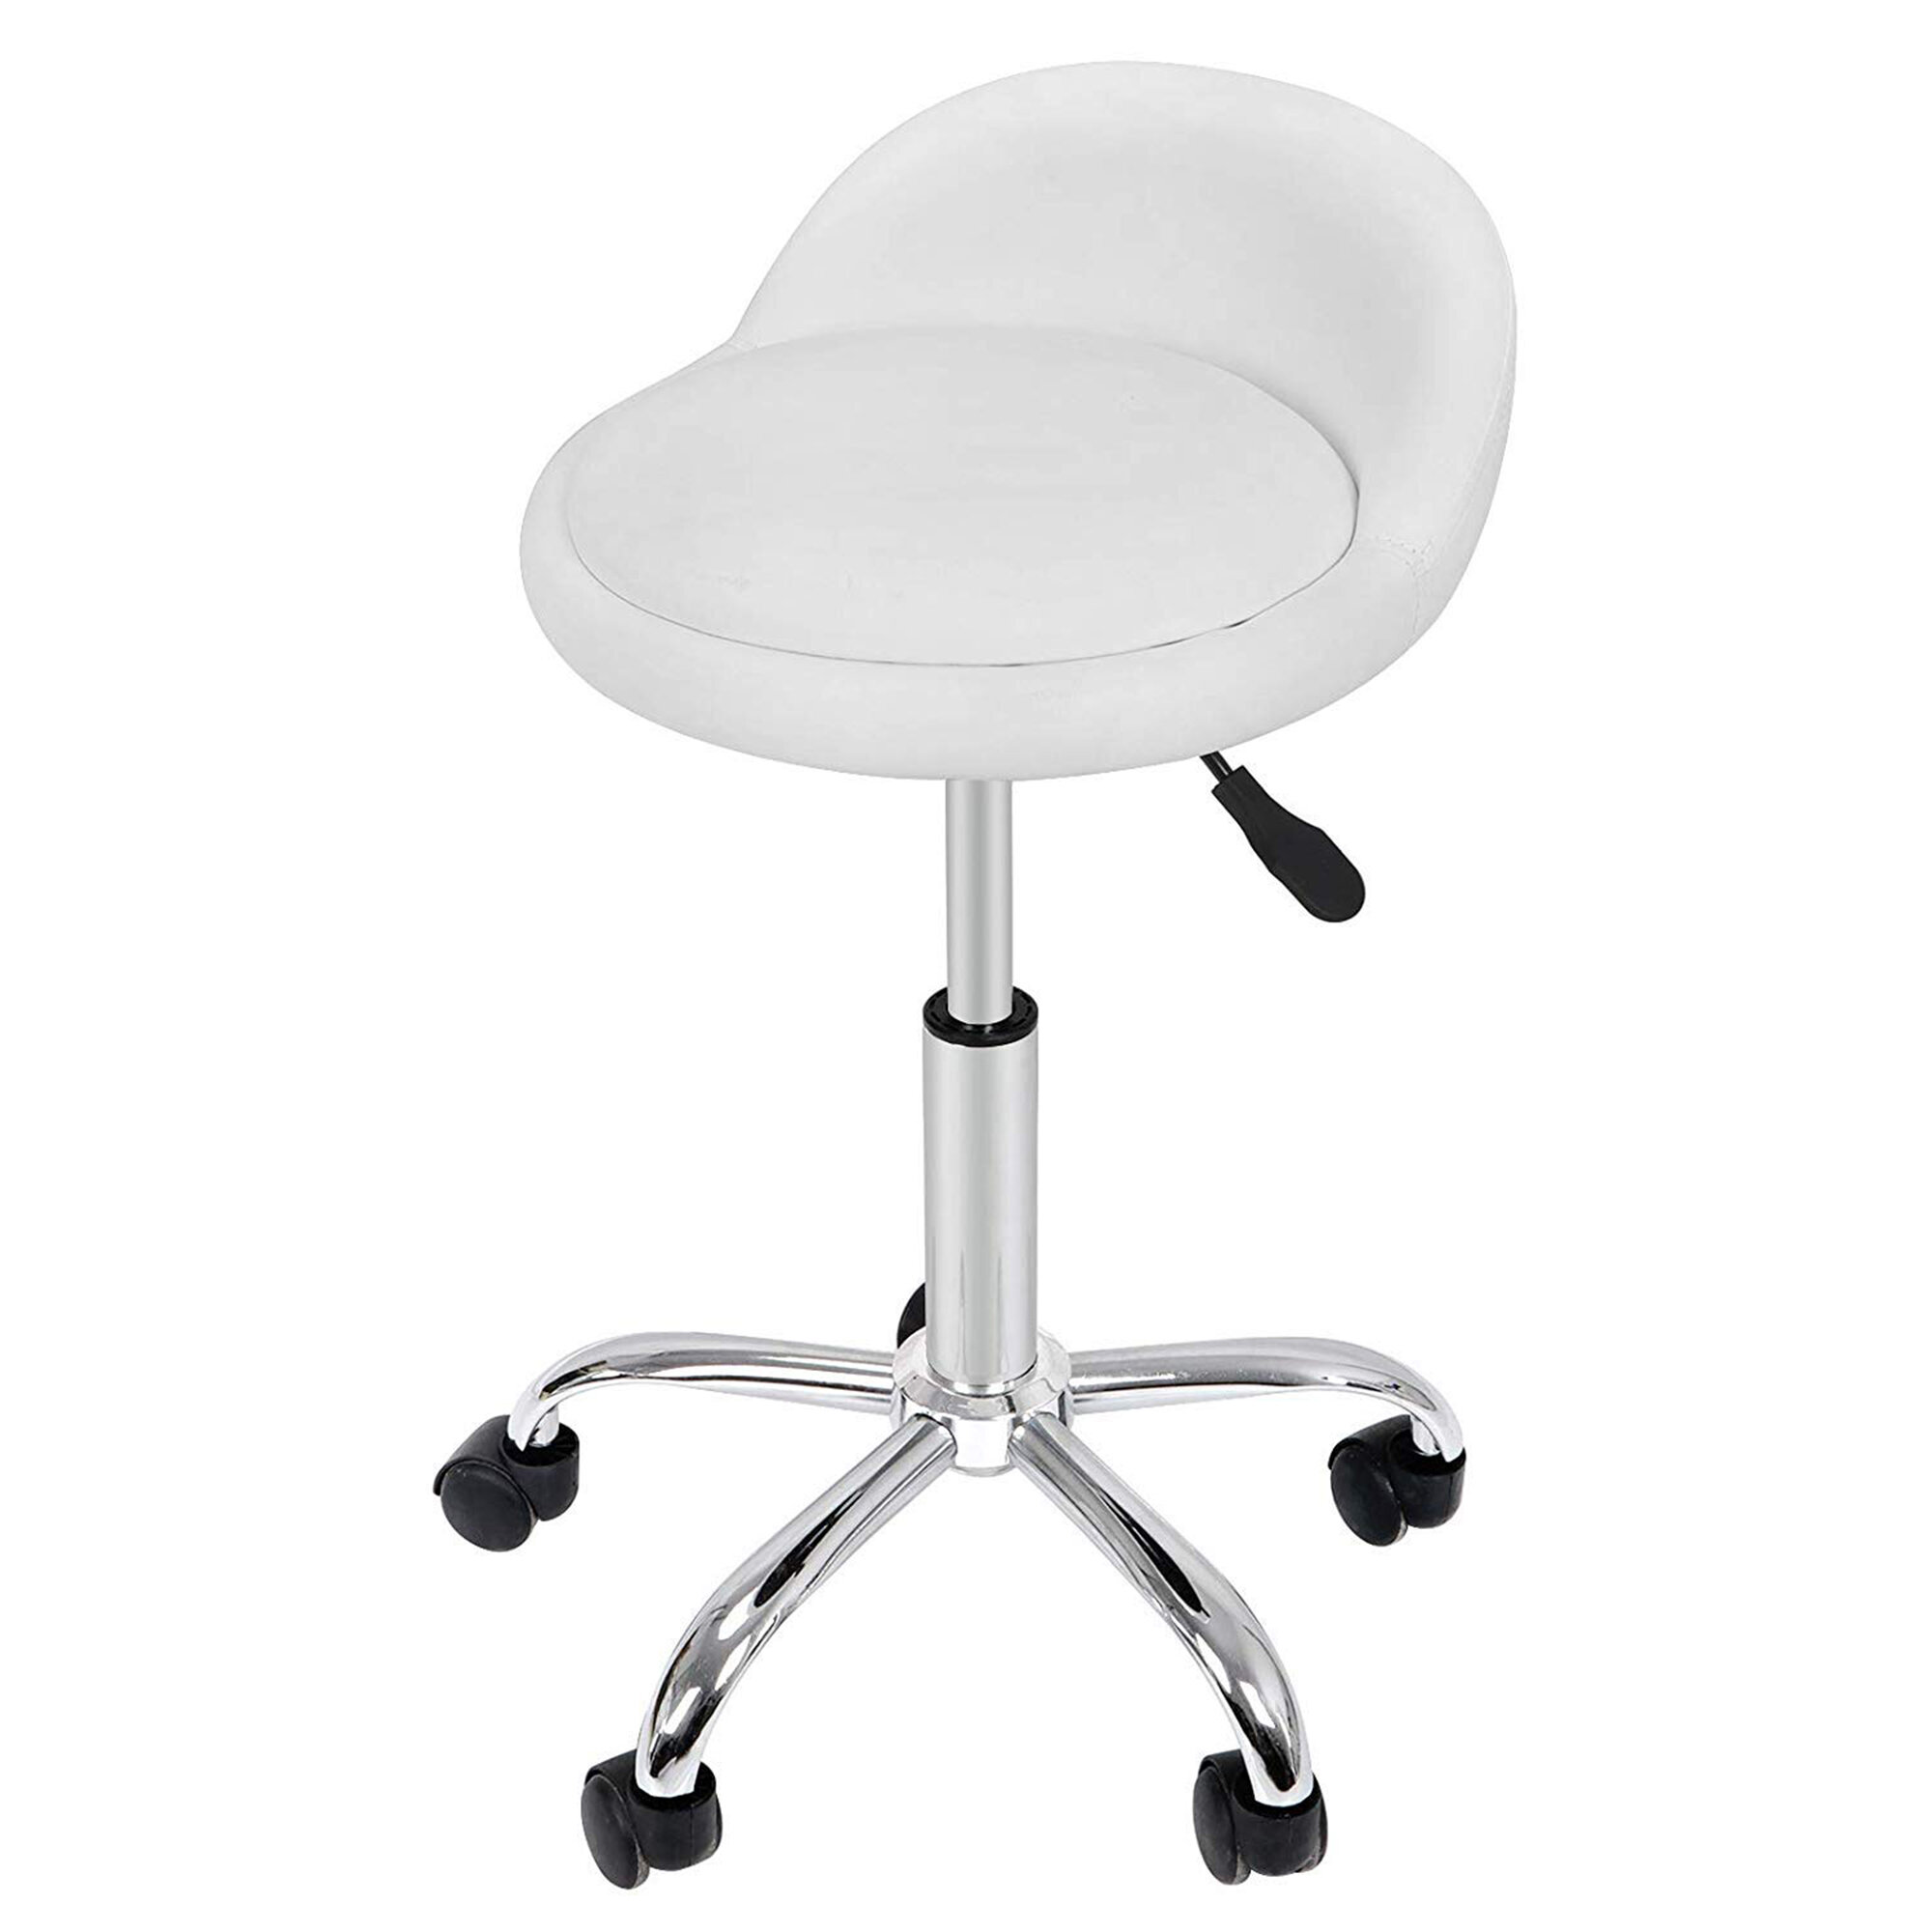 Saddle Stool Rolling Ergonomic Swivel Chair Polyurethane Stool Adjustable Height Hydraulic Chair with Wheels for Office Home Salon